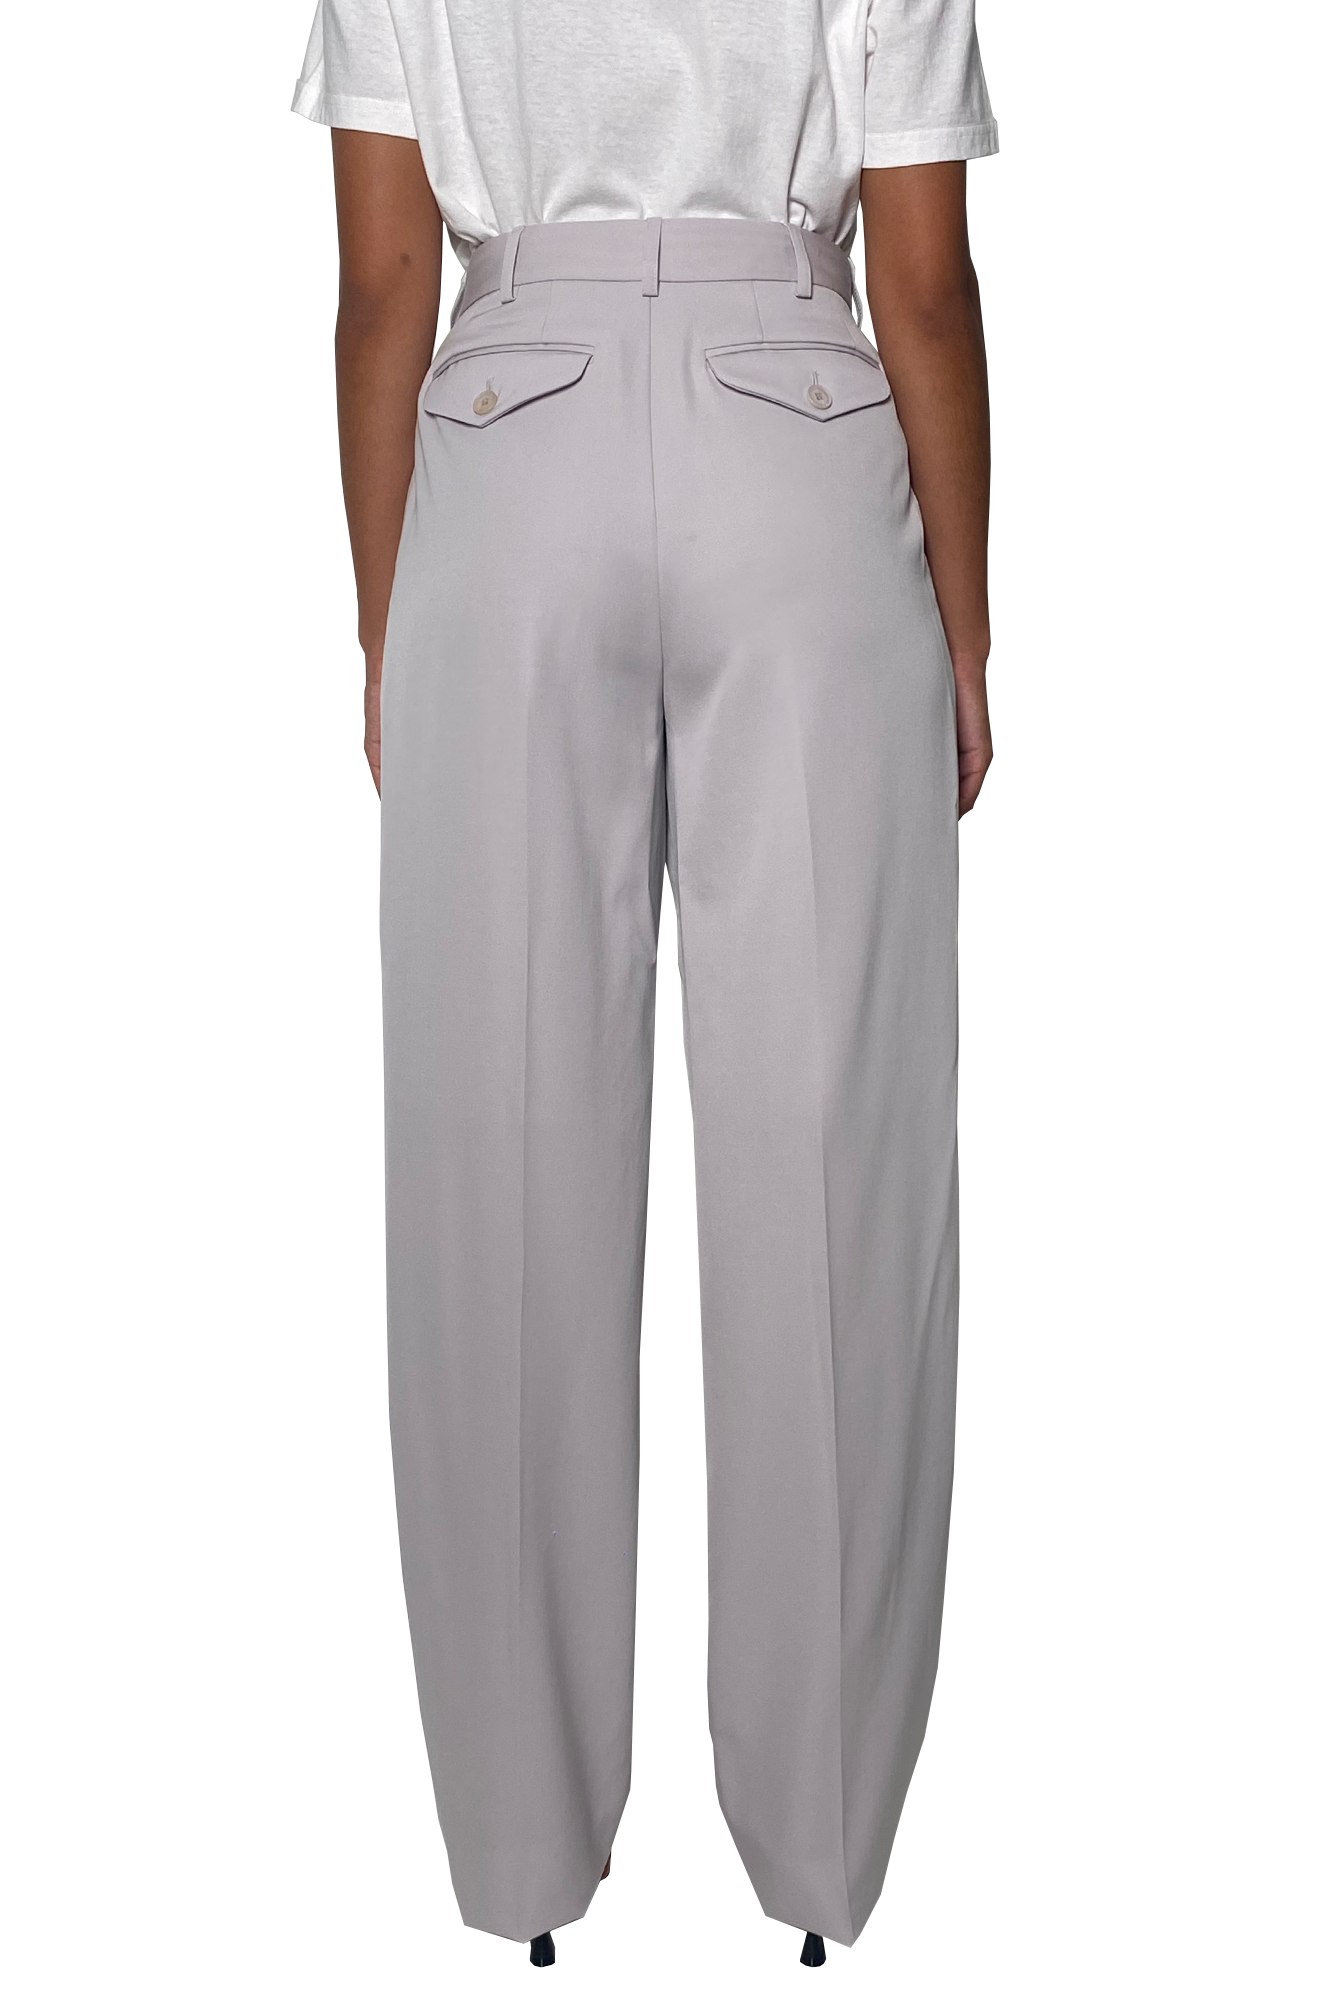 GREY HIGH WAISTED LOUISE PANT